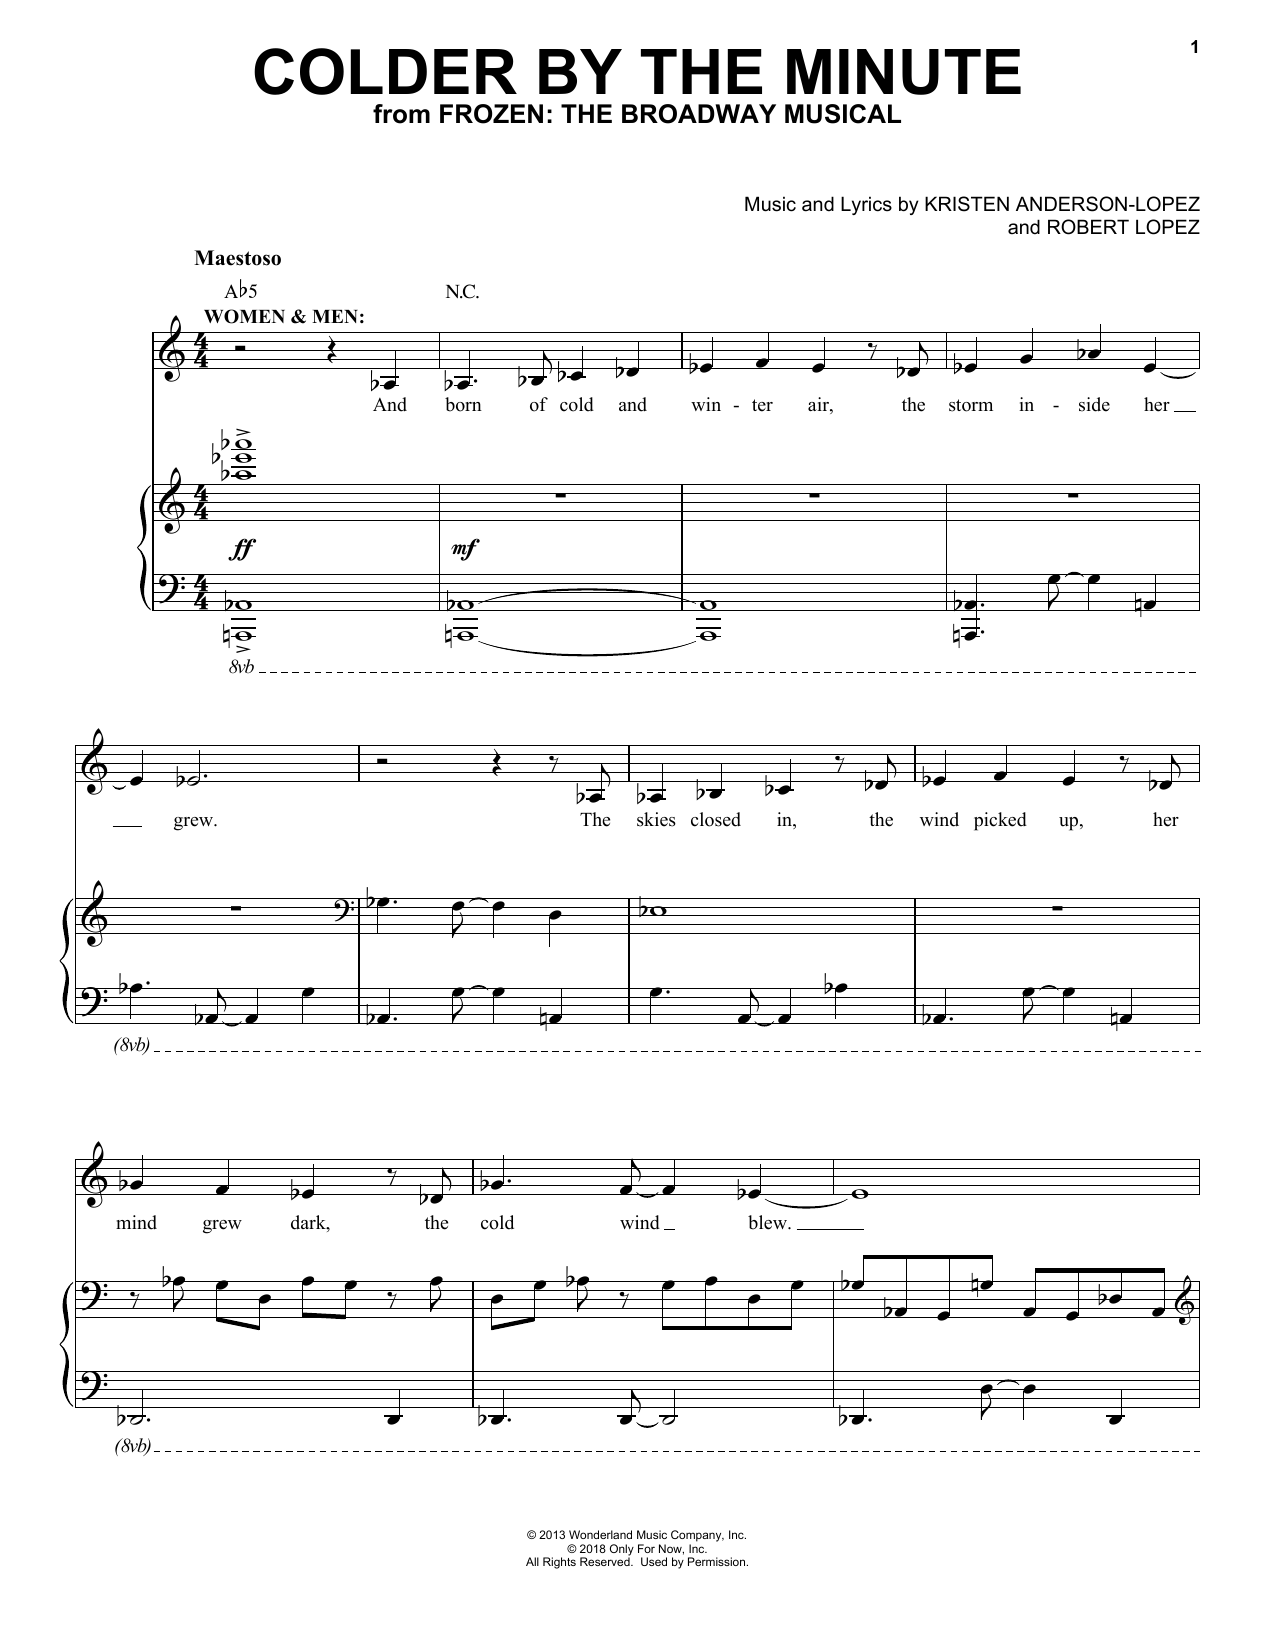 Download Kristen Anderson-Lopez & Robert Lope Colder By The Minute Sheet Music